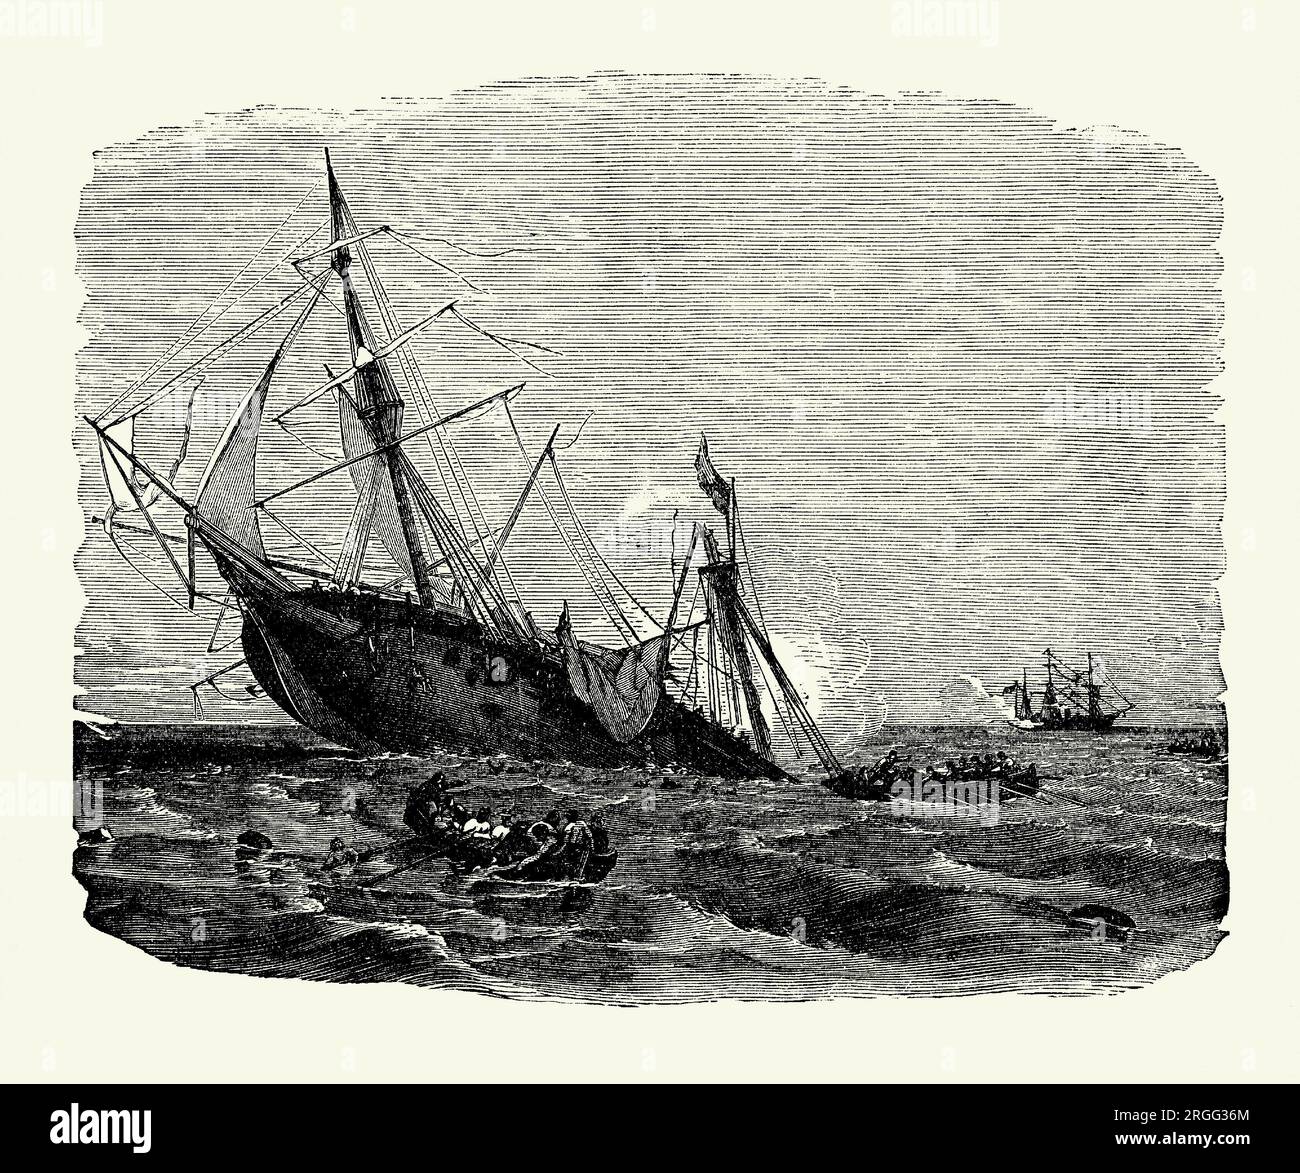 An old engraving of the sinking of the CSS Alabama, in June 1864 by the USS Kearsarge at the Battle of Cherbourg outside the port of Cherbourg, France, during the American Civil War. It is from an American history book of 1895. The Alabama was a screw sloop-of-war built in 1862 for the Confederate States Navy. It was built in Birkenhead, England by John Laird Sons and Company as ‘ship number 0290’. She was launched as ‘Enrica’ and secretly slipped away on 29 July 1862. Alabama served as a successful commerce raider, attacking Union shipping in her two-year career until she was sunk. Stock Photo